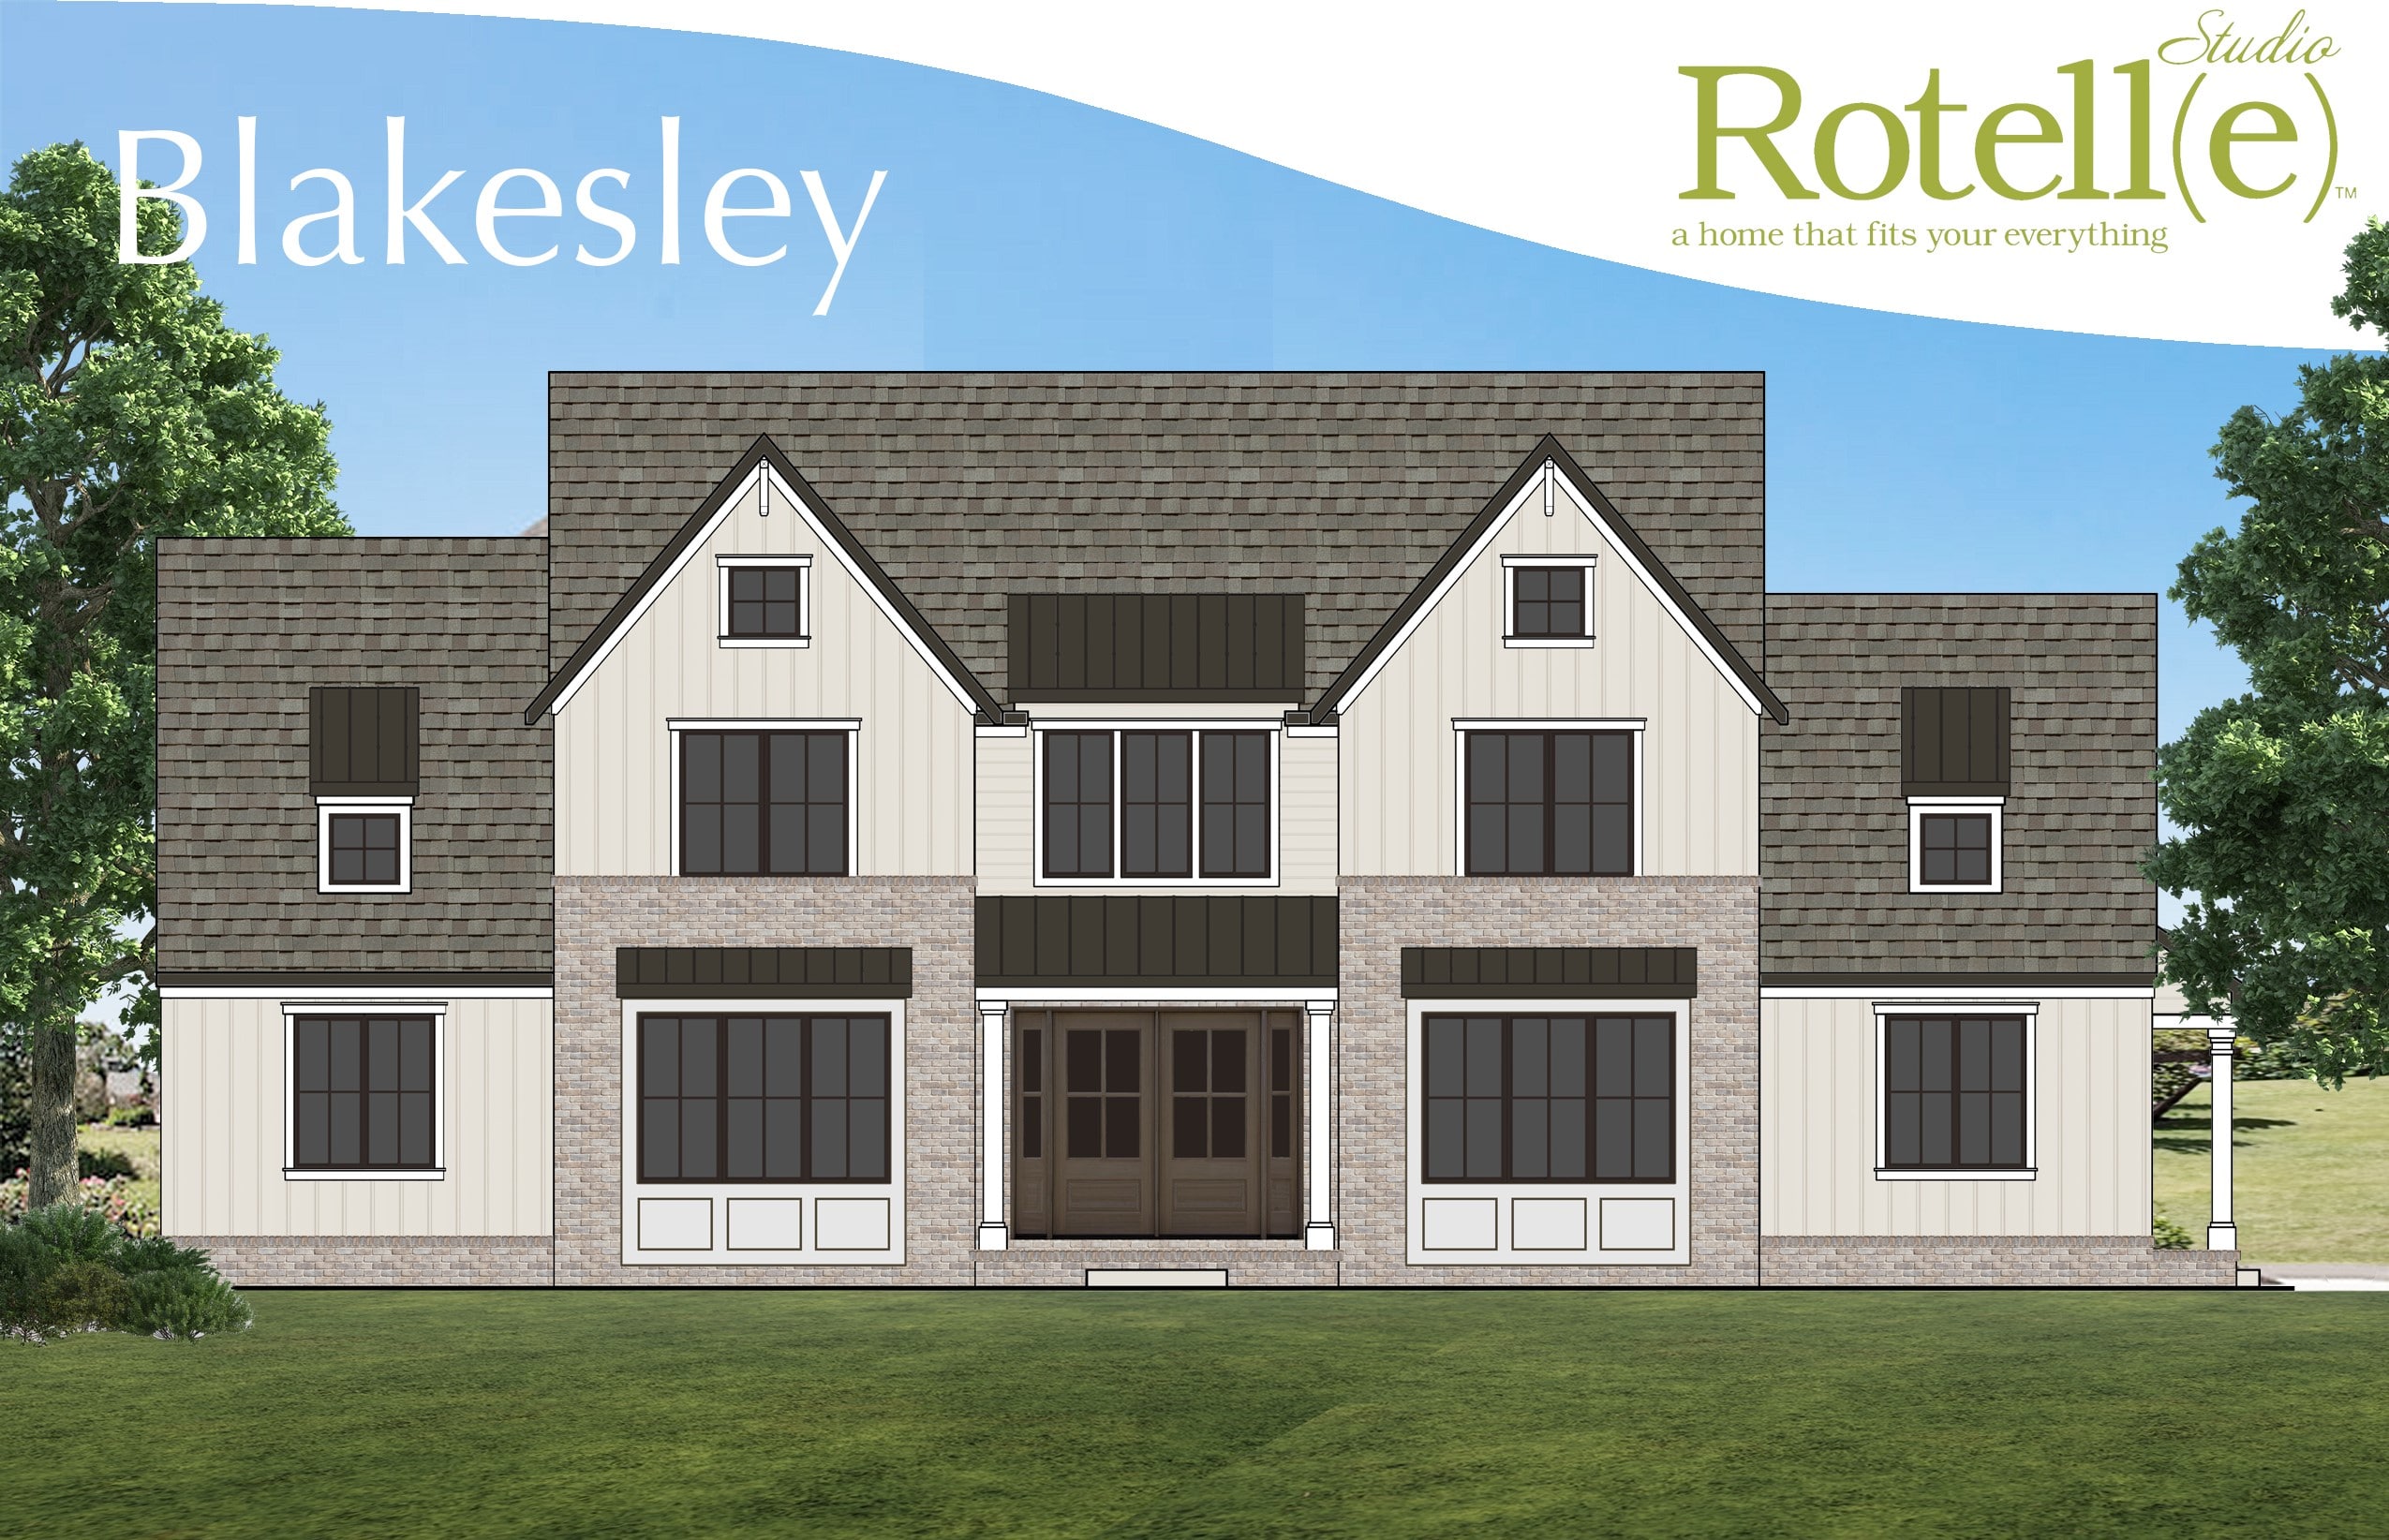 front elevation of the blakesley model from rotelle